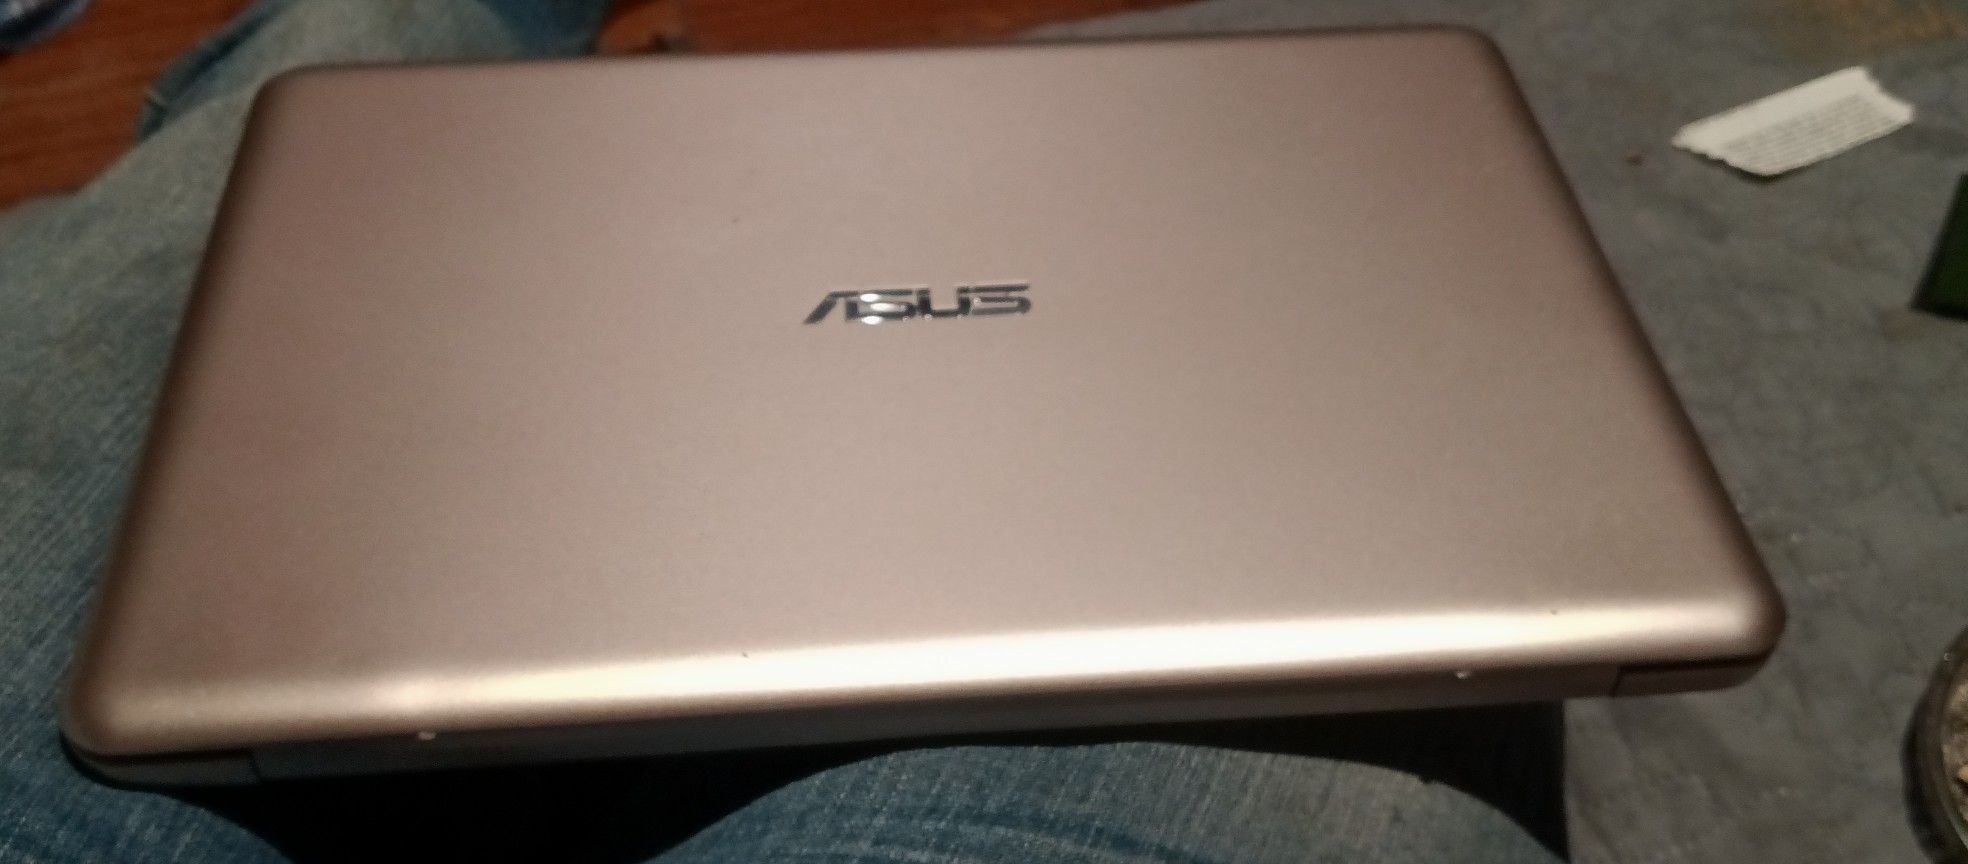 Asus E200H Notebook Pc